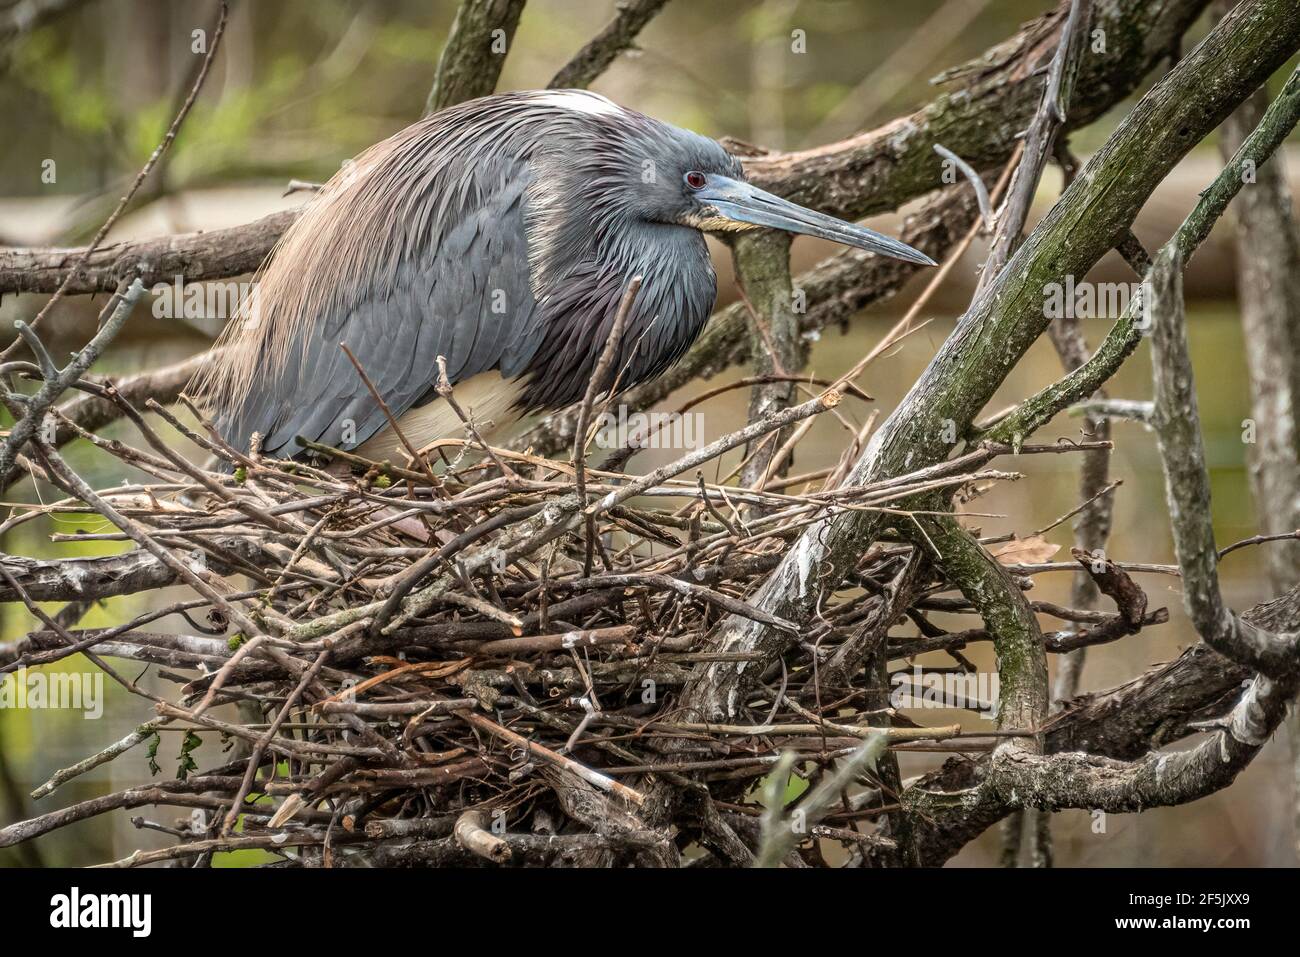 Tricolored heron at the St. Augustine Alligator Farm rookery where wild herons and roseate spoonbills come to breed because of safety from predators. Stock Photo